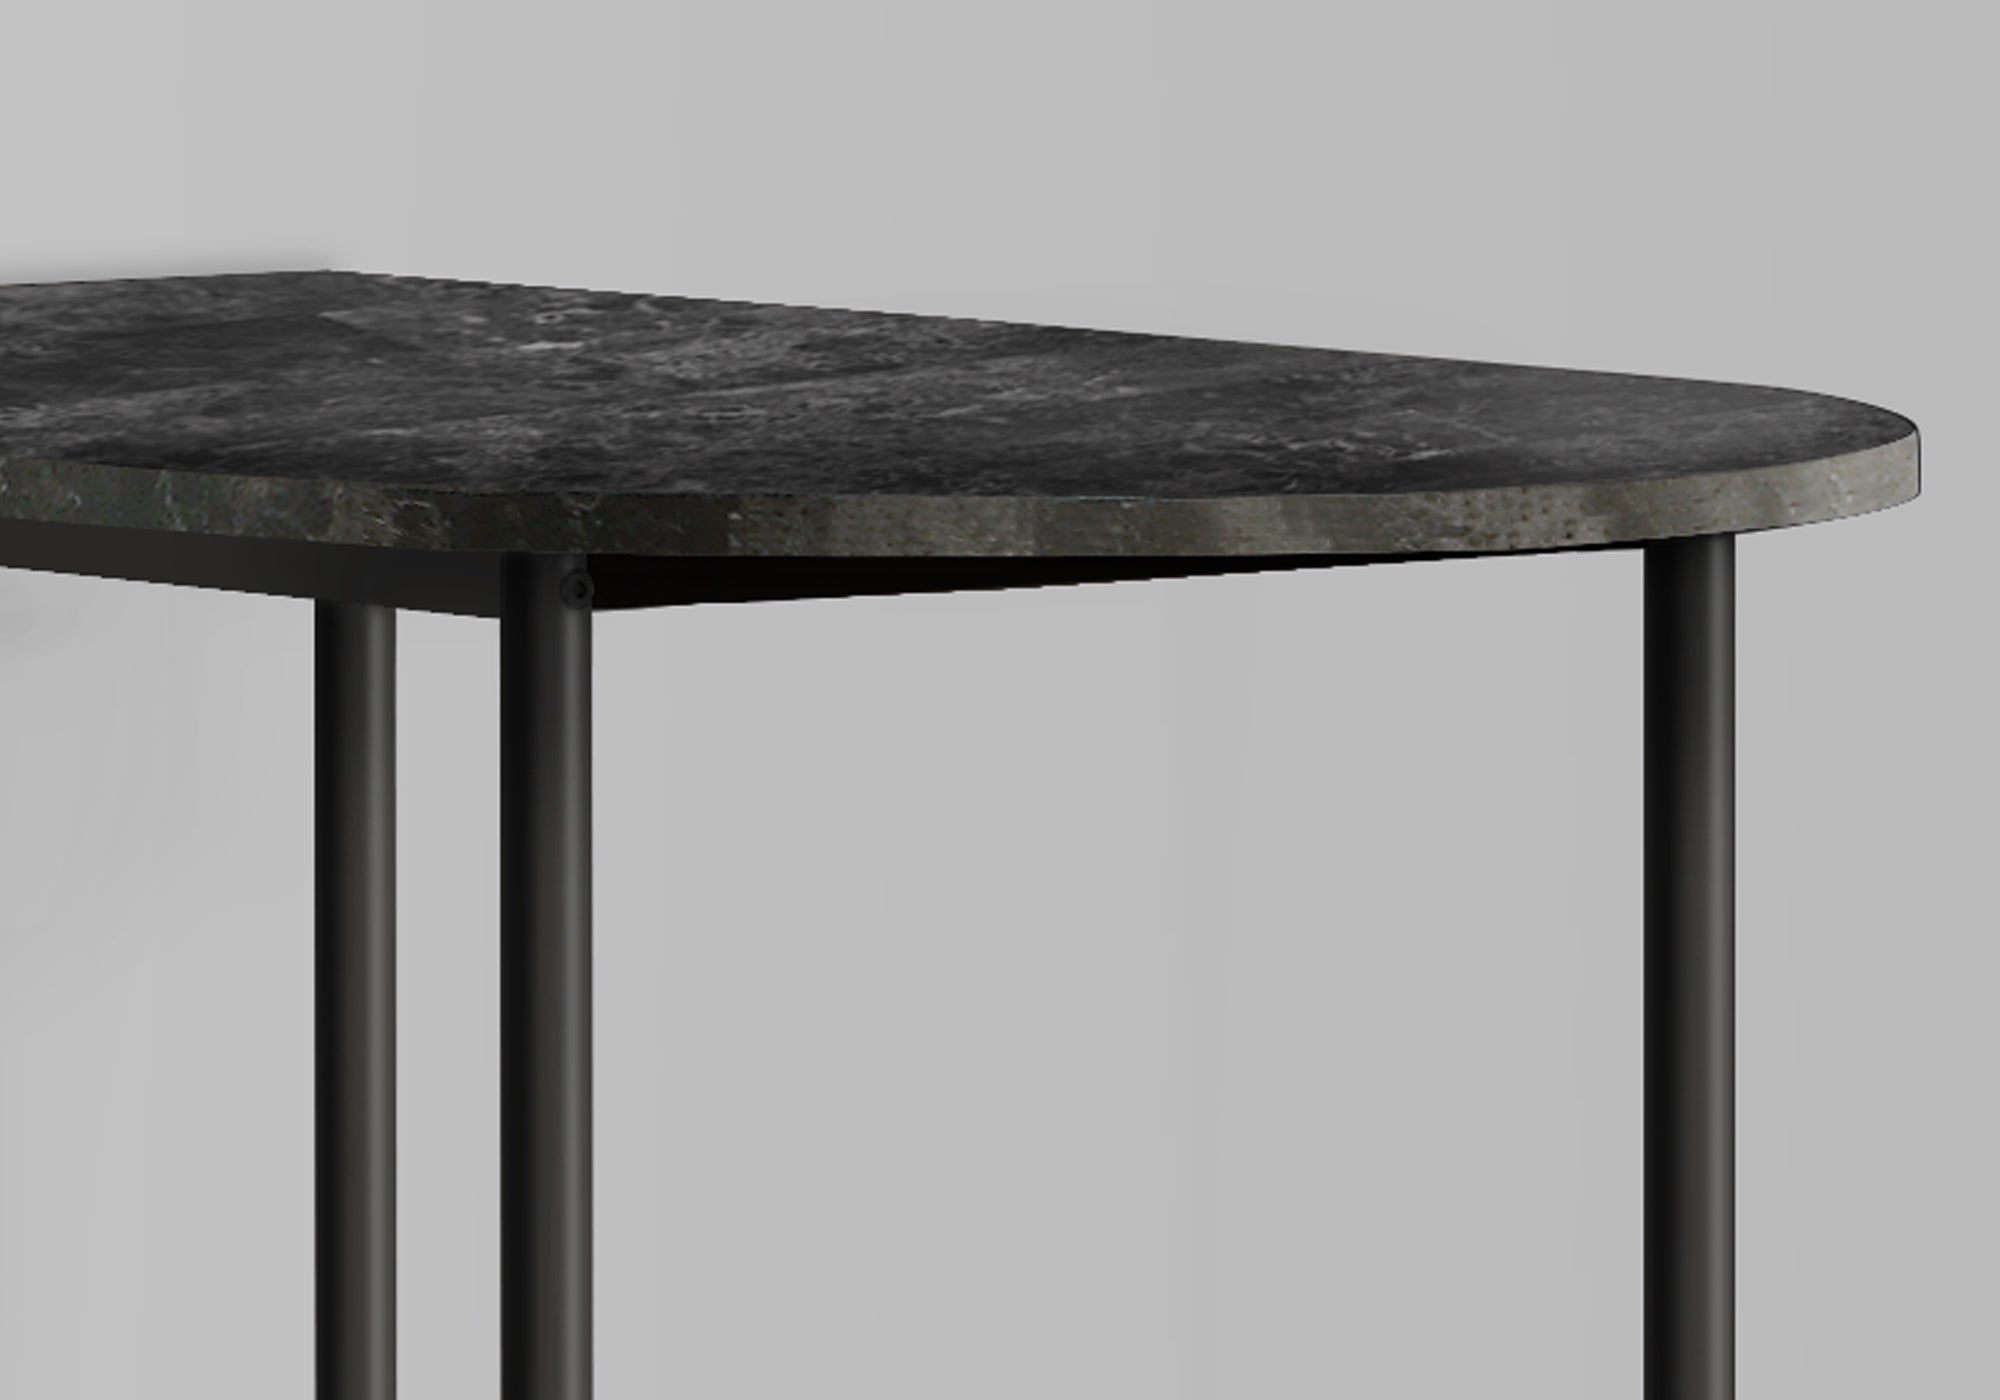 MN-742325    Home Bar, Bar Table, Bar Height, Pub Table, 36" Rectangular, Small, Kitchen, Living Room, Metal, Laminate, Grey Marble Look, Charcoal Grey, Transitional